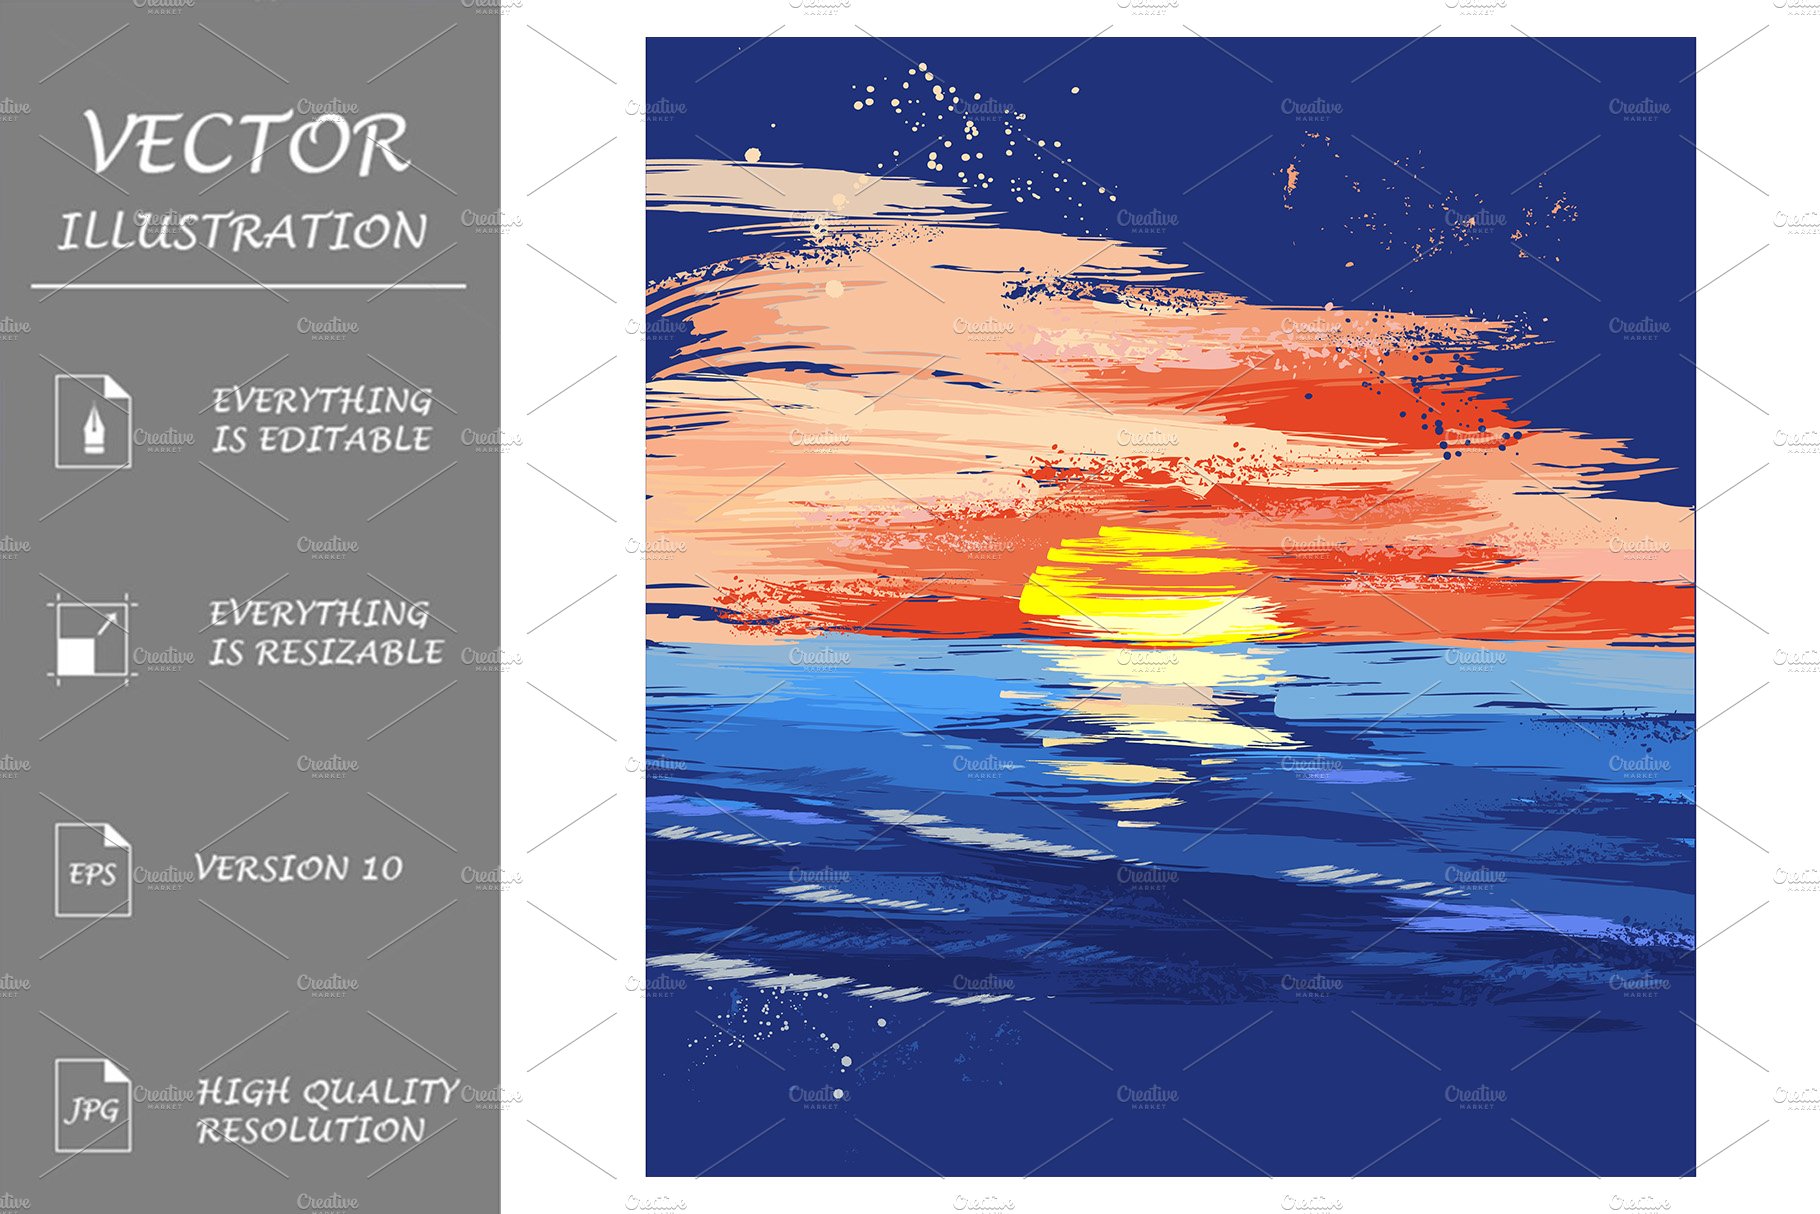 Painted Sunset on the Sea cover image.